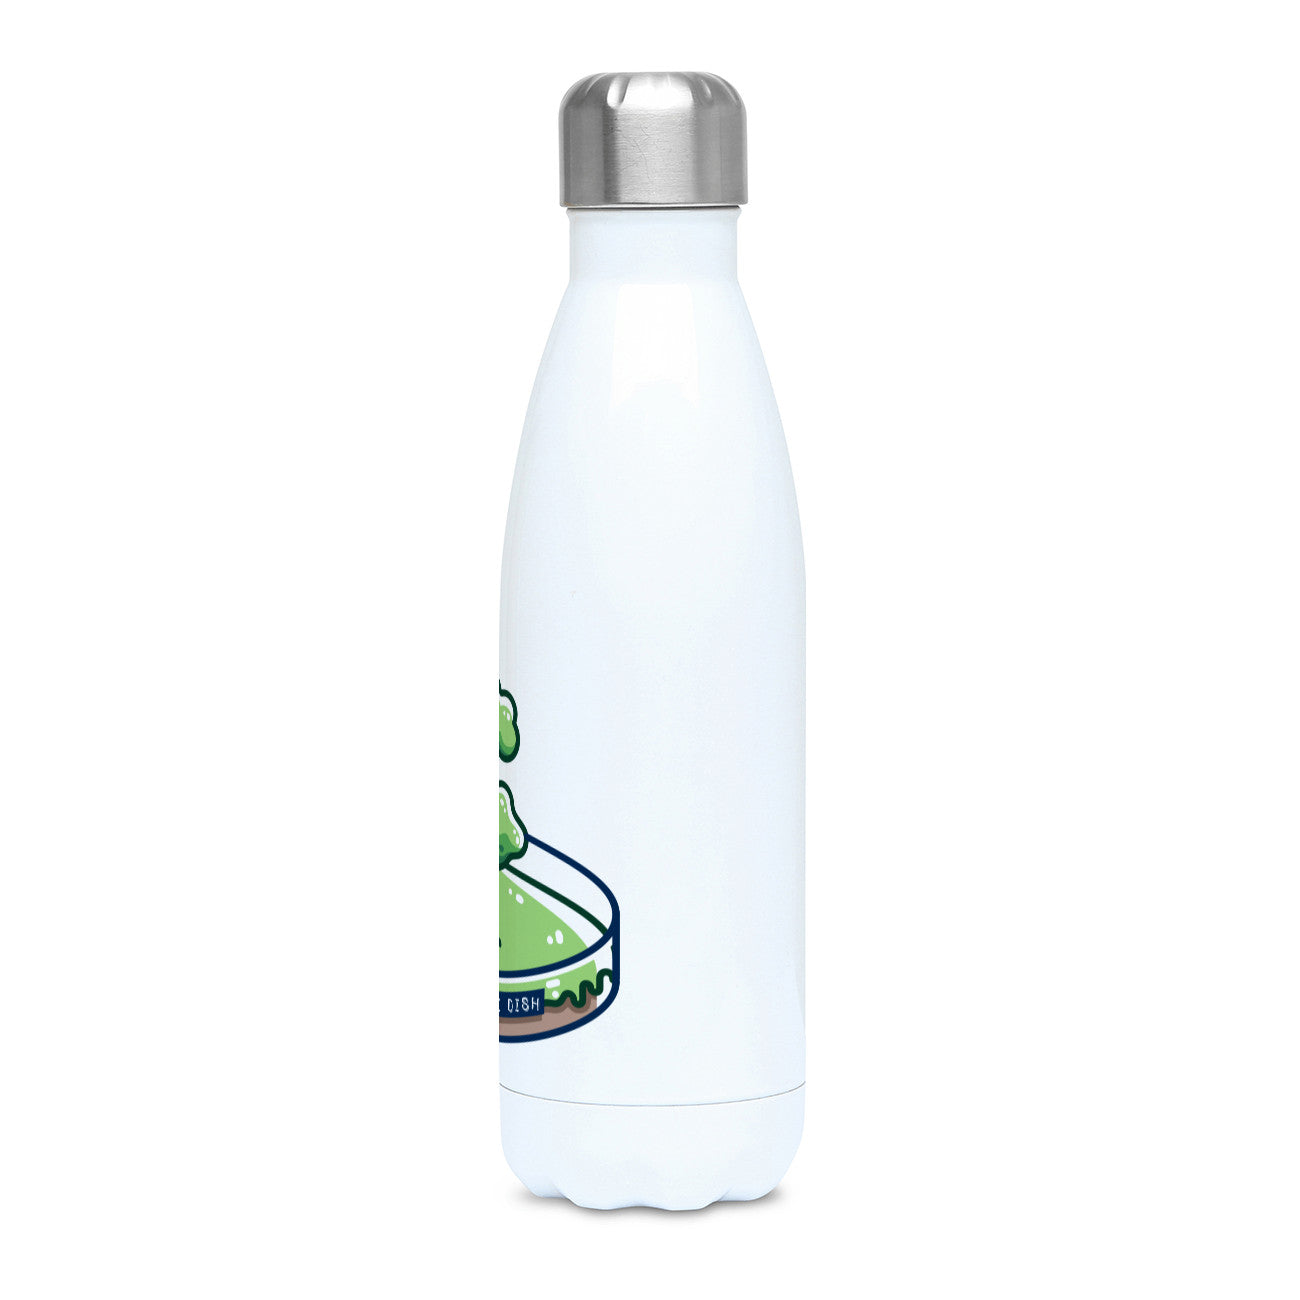 A tall white stainless steel drinks bottle seen from the front with its silver lid on and the edge of the design showing.